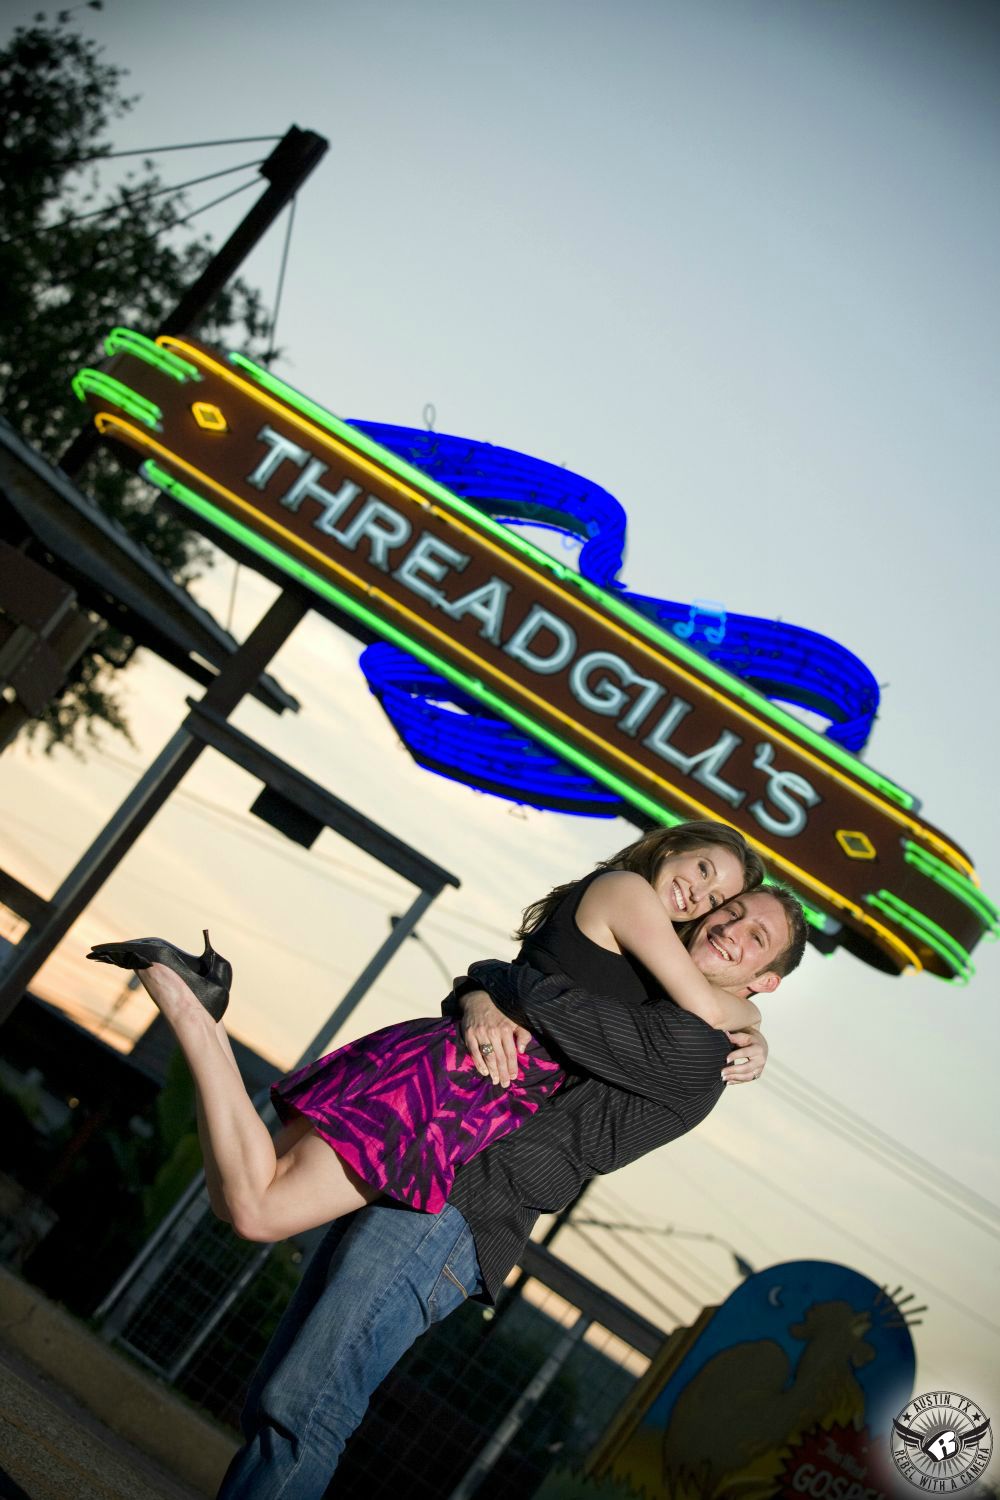 Dirty blond haired girl wearing a black and pink dress and black heels jumps into the arms of her fiancé, a guy with dishwater blond hair wearing a long sleeve black button up shirt and blue jeans in front of the Threadgill's sign with a blue and orange sky in this colorful engagement snapshot in downtown Austin.